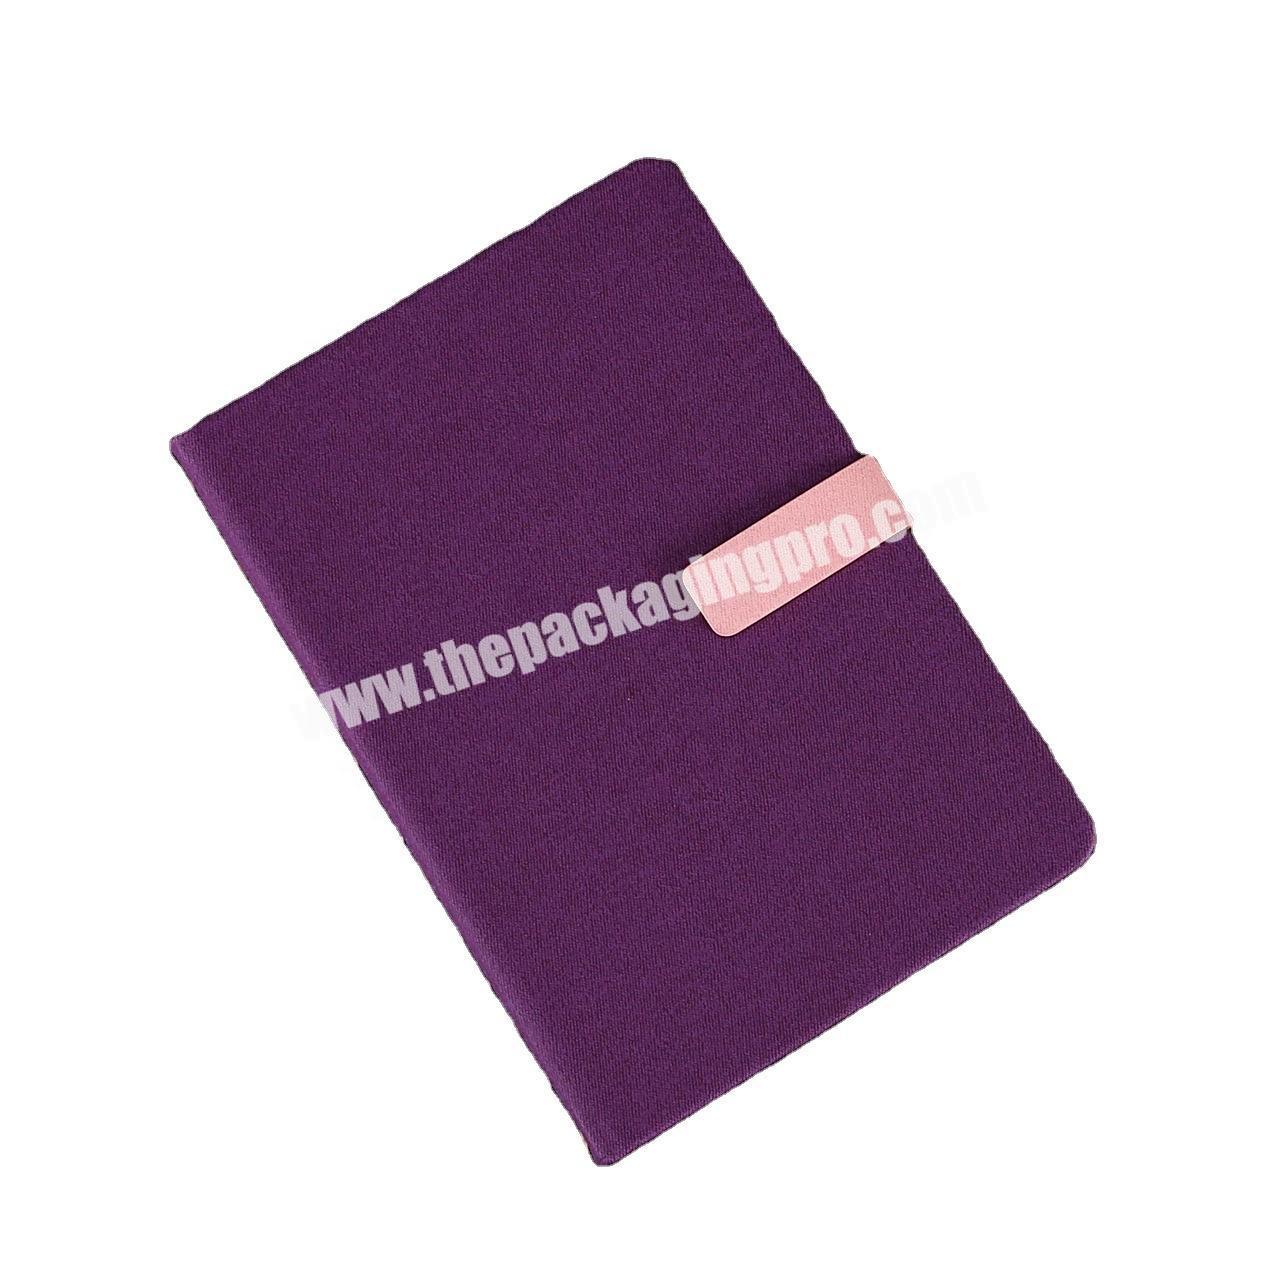 Customized Write Usage A5 Fabric Linen Notebooks Hardcover School Exercise Notebook Purple Blue Stationary Magnetic Journal